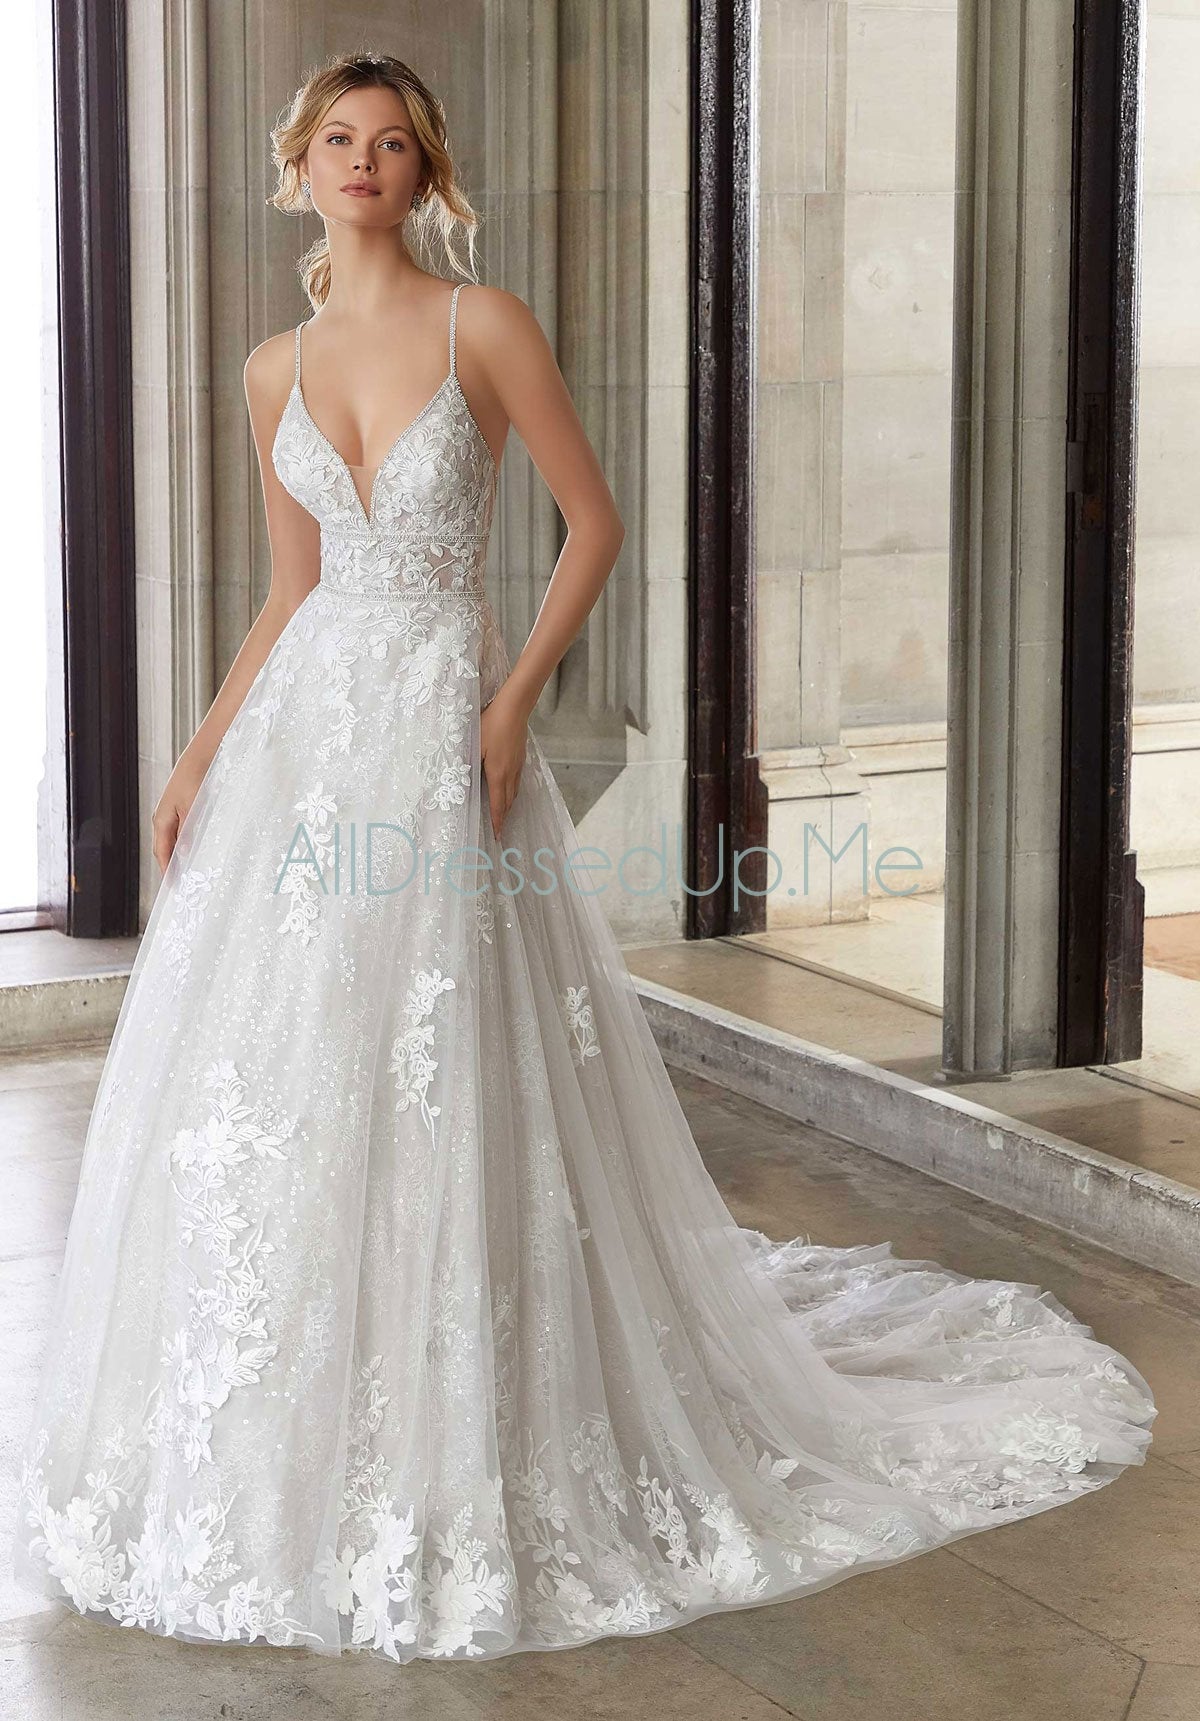 Morilee - Skylar - 2127 - Cheron's Bridal, Wedding Gown - Morilee Line - - Wedding Gowns Dresses Chattanooga Hixson Shops Boutiques Tennessee TN Georgia GA MSRP Lowest Prices Sale Discount